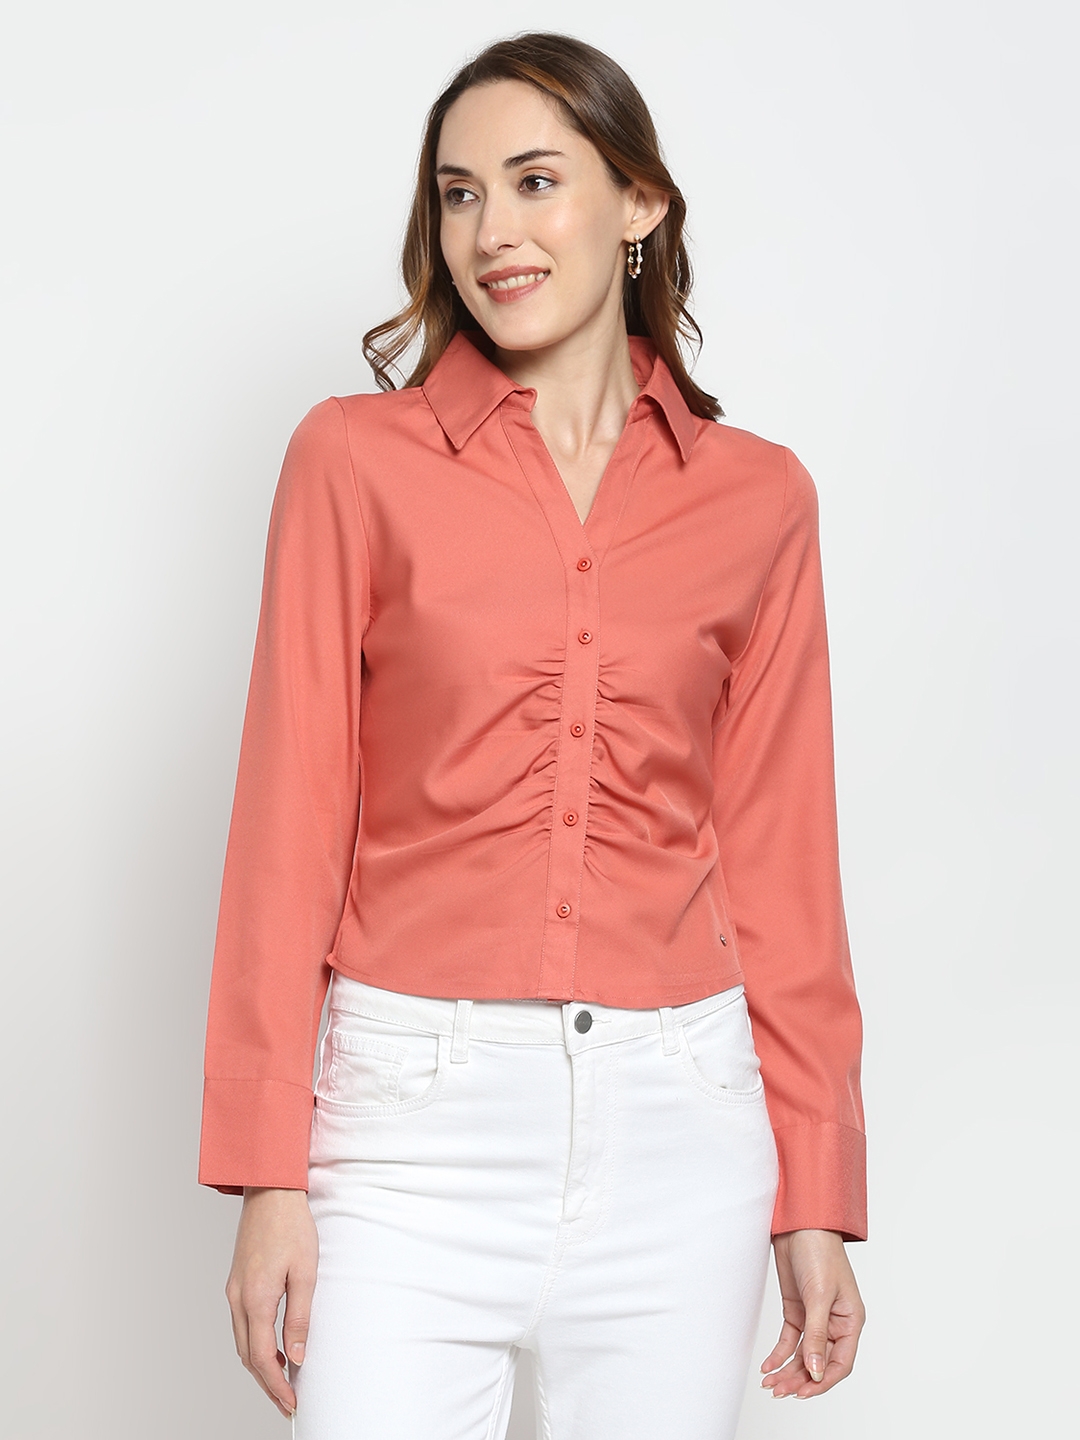 Women's Red Satin Solid Casual Shirts